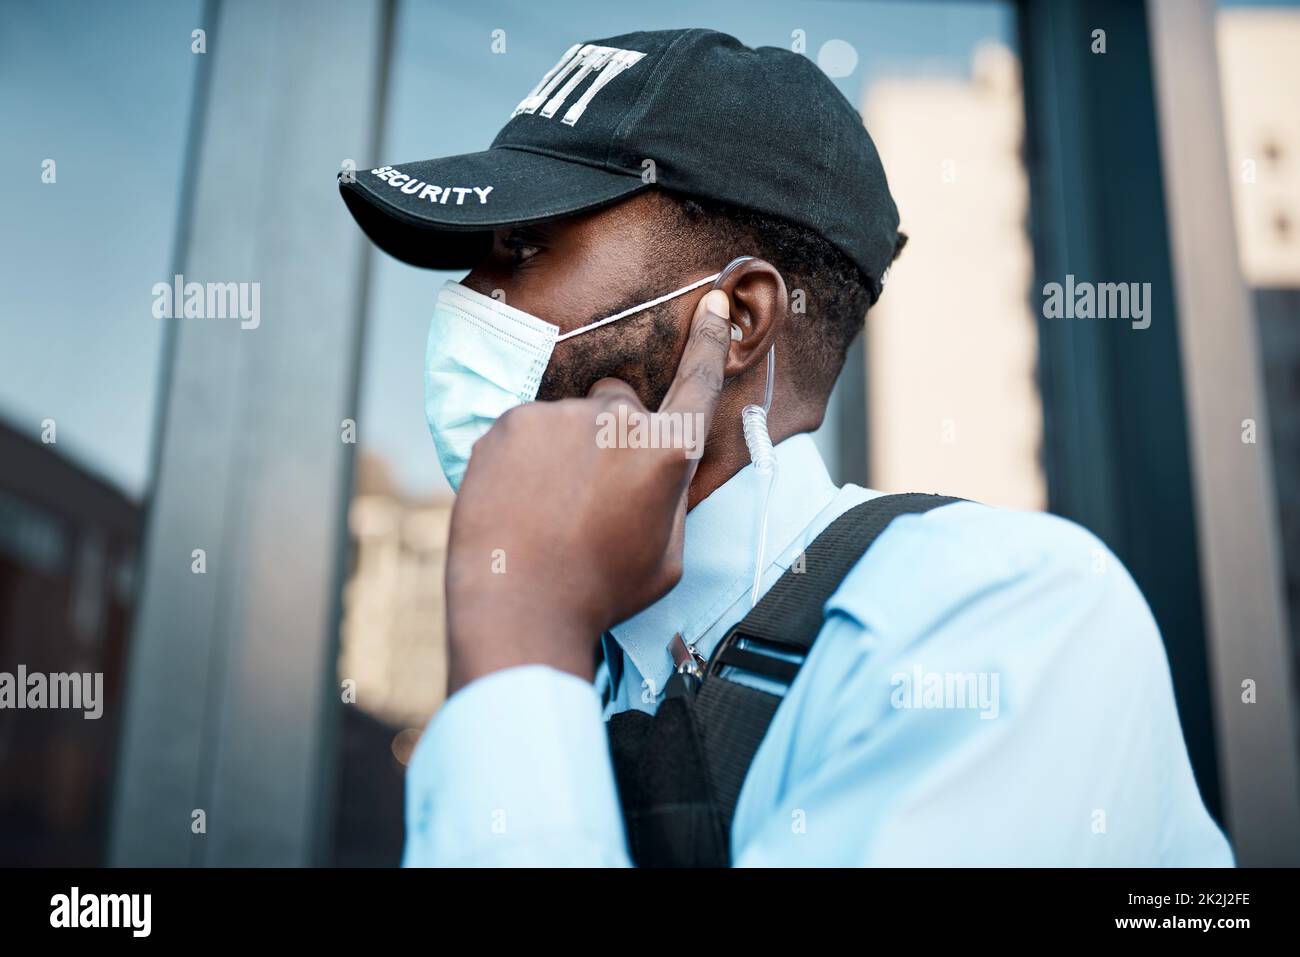 Swift action the first sign of trouble. Shot of a masked young security guard using an earpiece while on patrol outdoors. Stock Photo